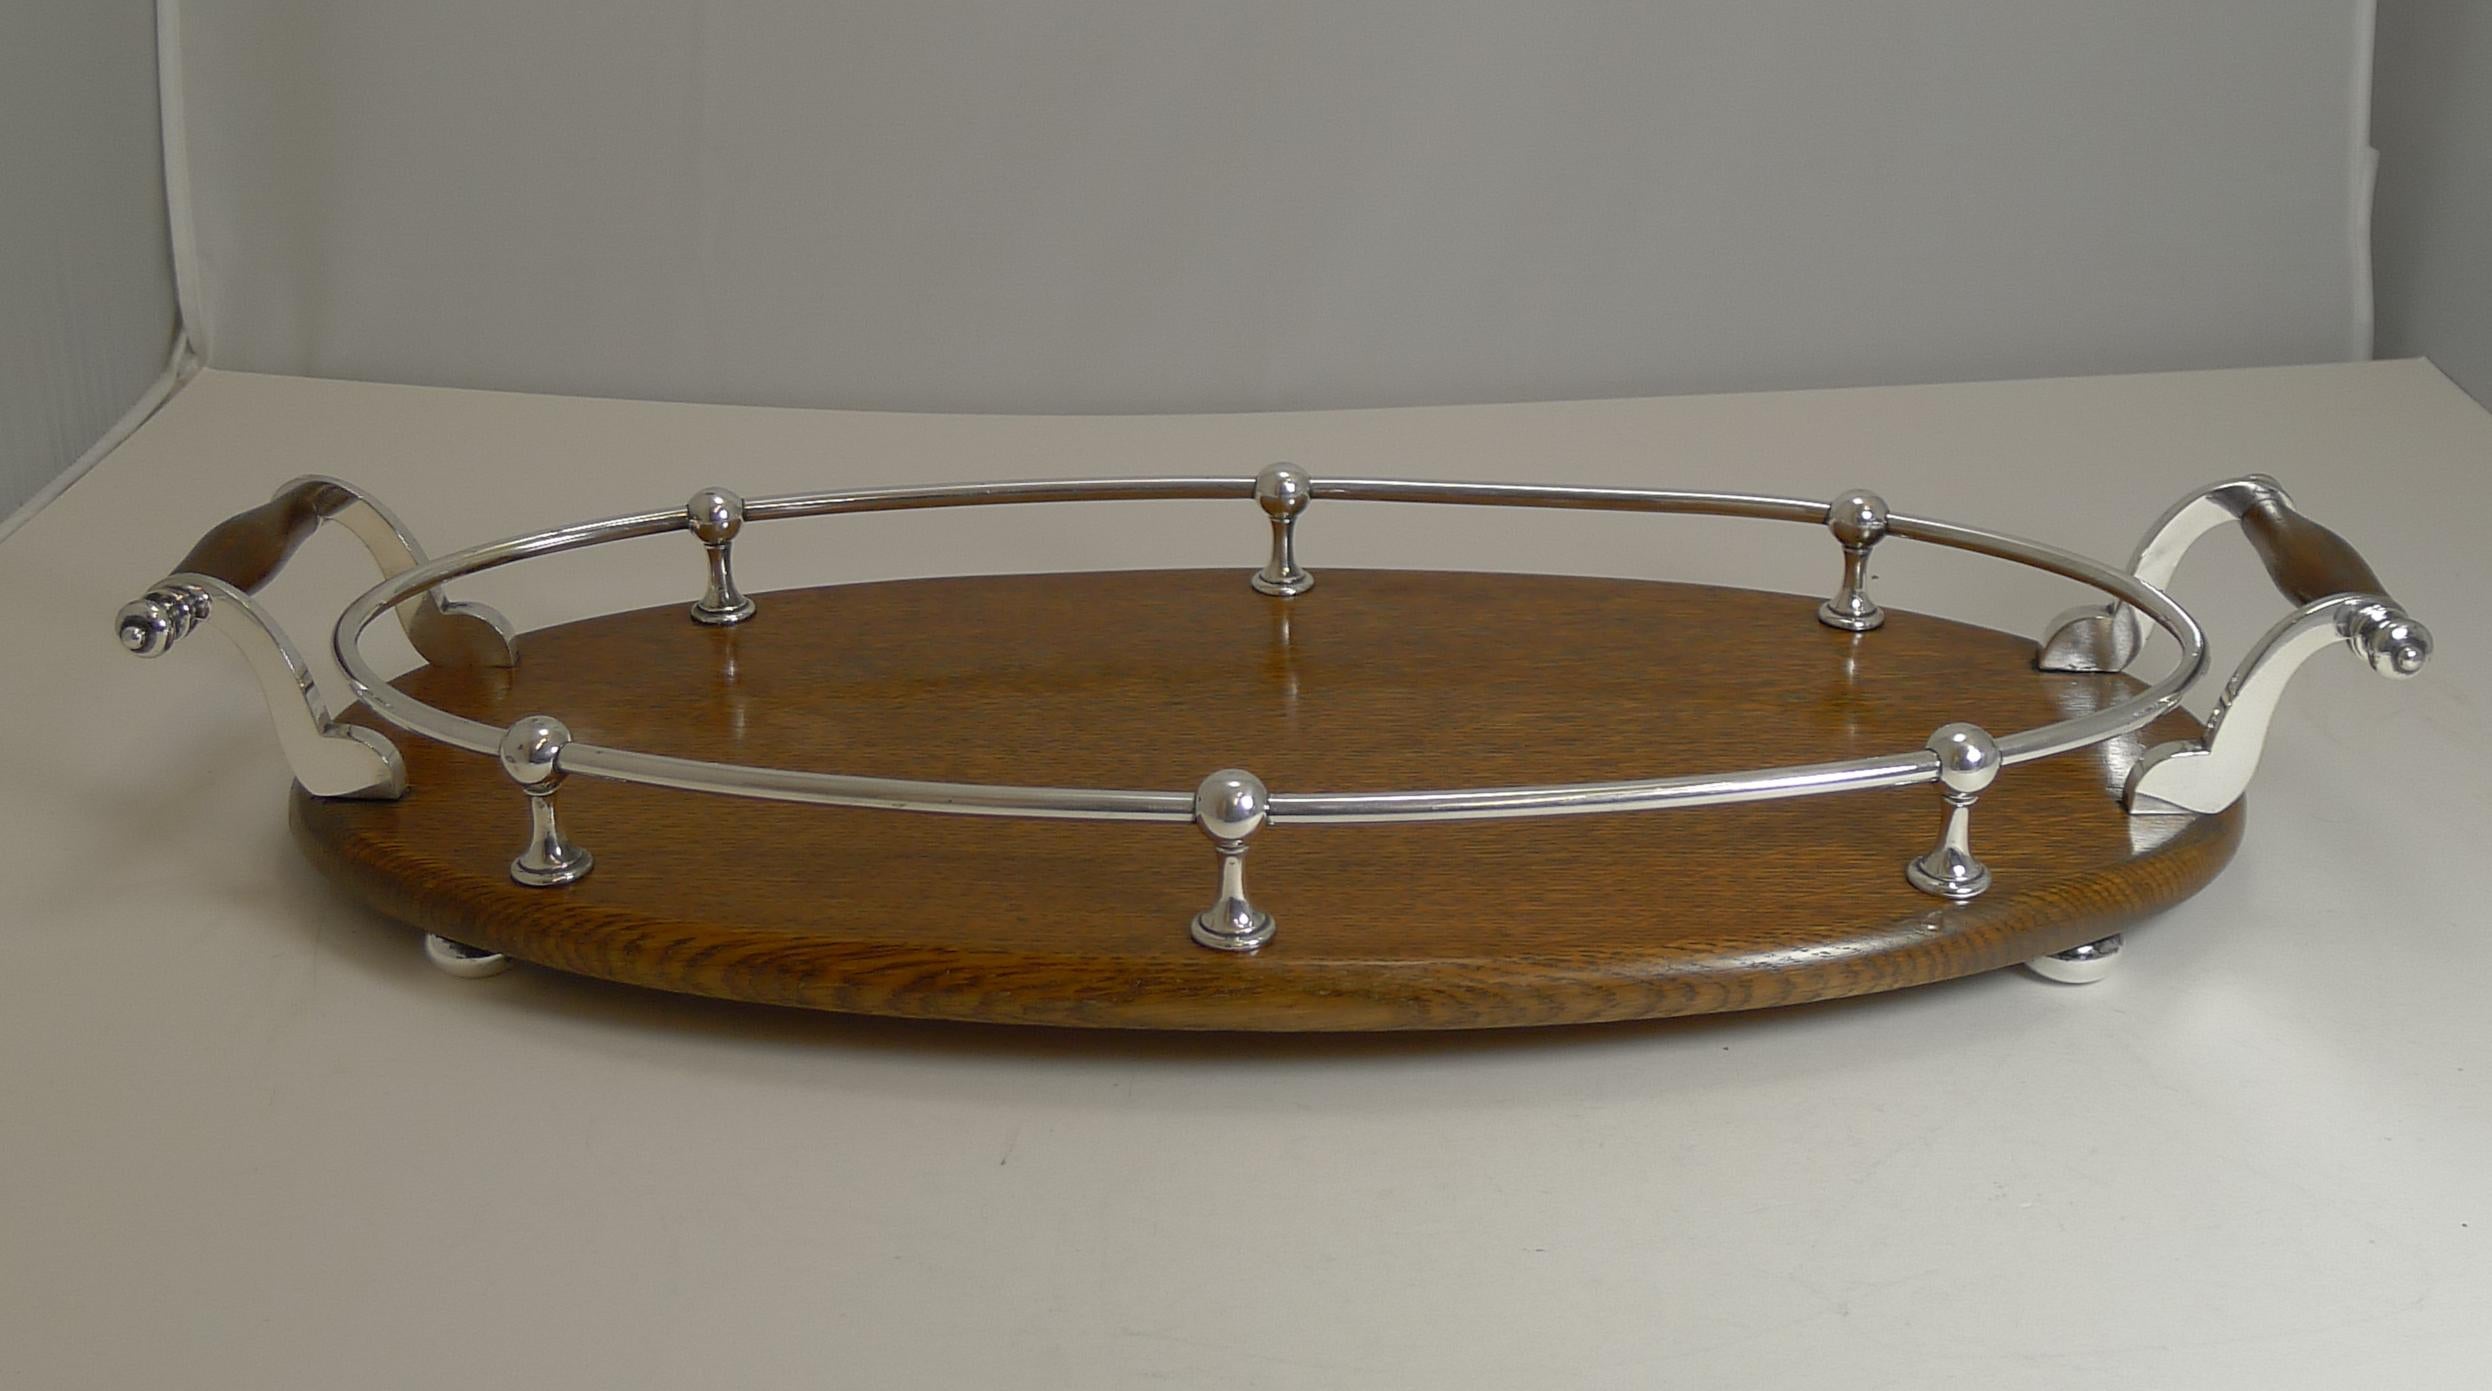 Late Victorian Antique English Oak and Silver Plate Drinks / Cocktail Tray, circa 1900